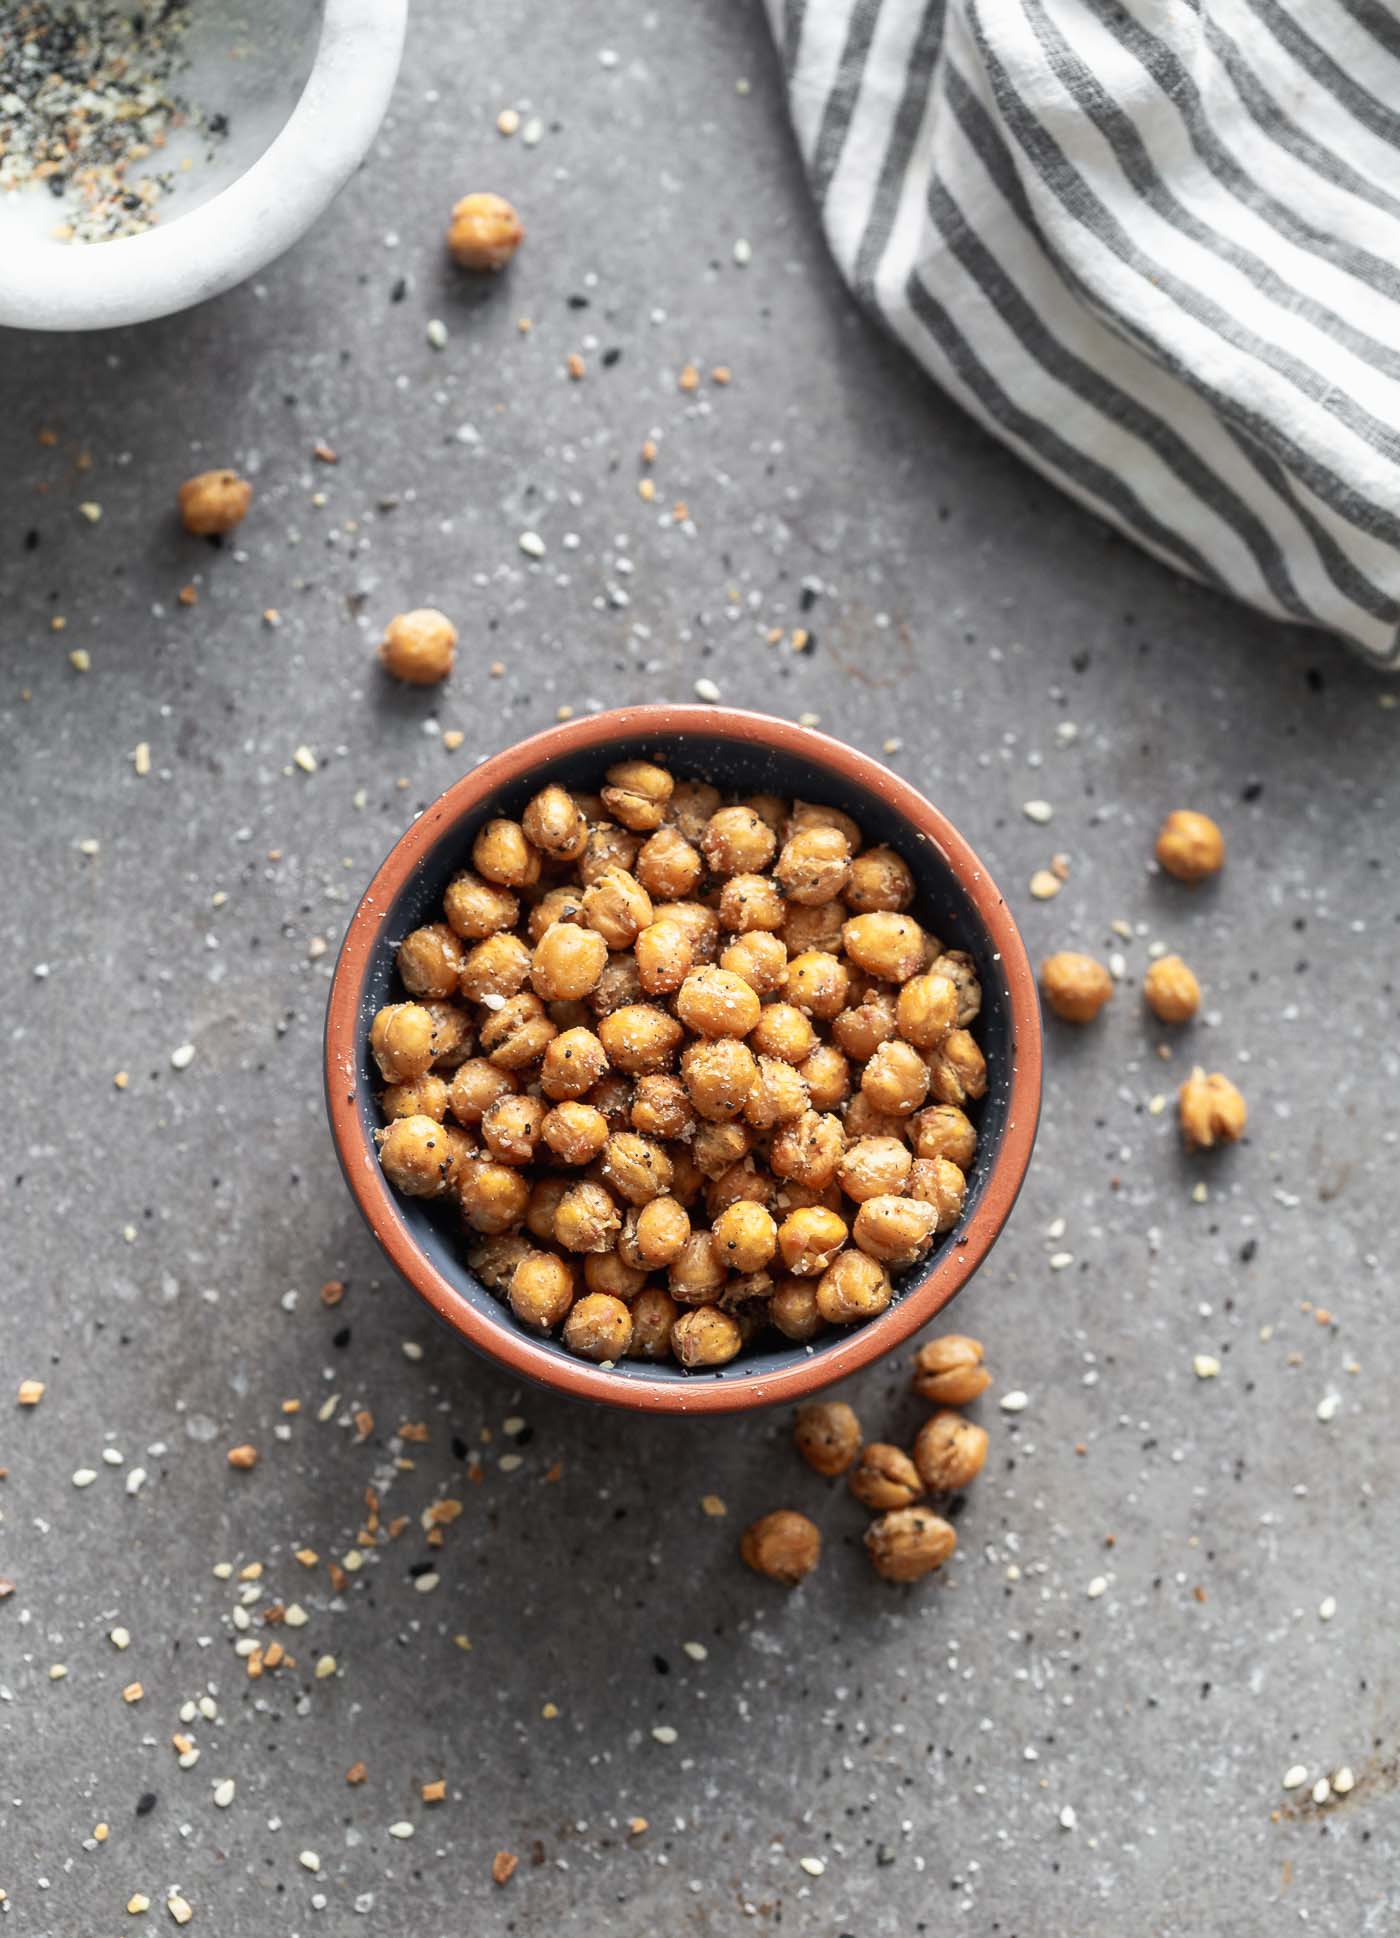 Crispy Everything Bagel Chickpeas are the perfect snack! They're covered in ground up everything bagel seasoning, tossed with olive oil and baked until golden brown and crispy. Store them in an airtight container and pull them out whenever you feel the need to snack!

